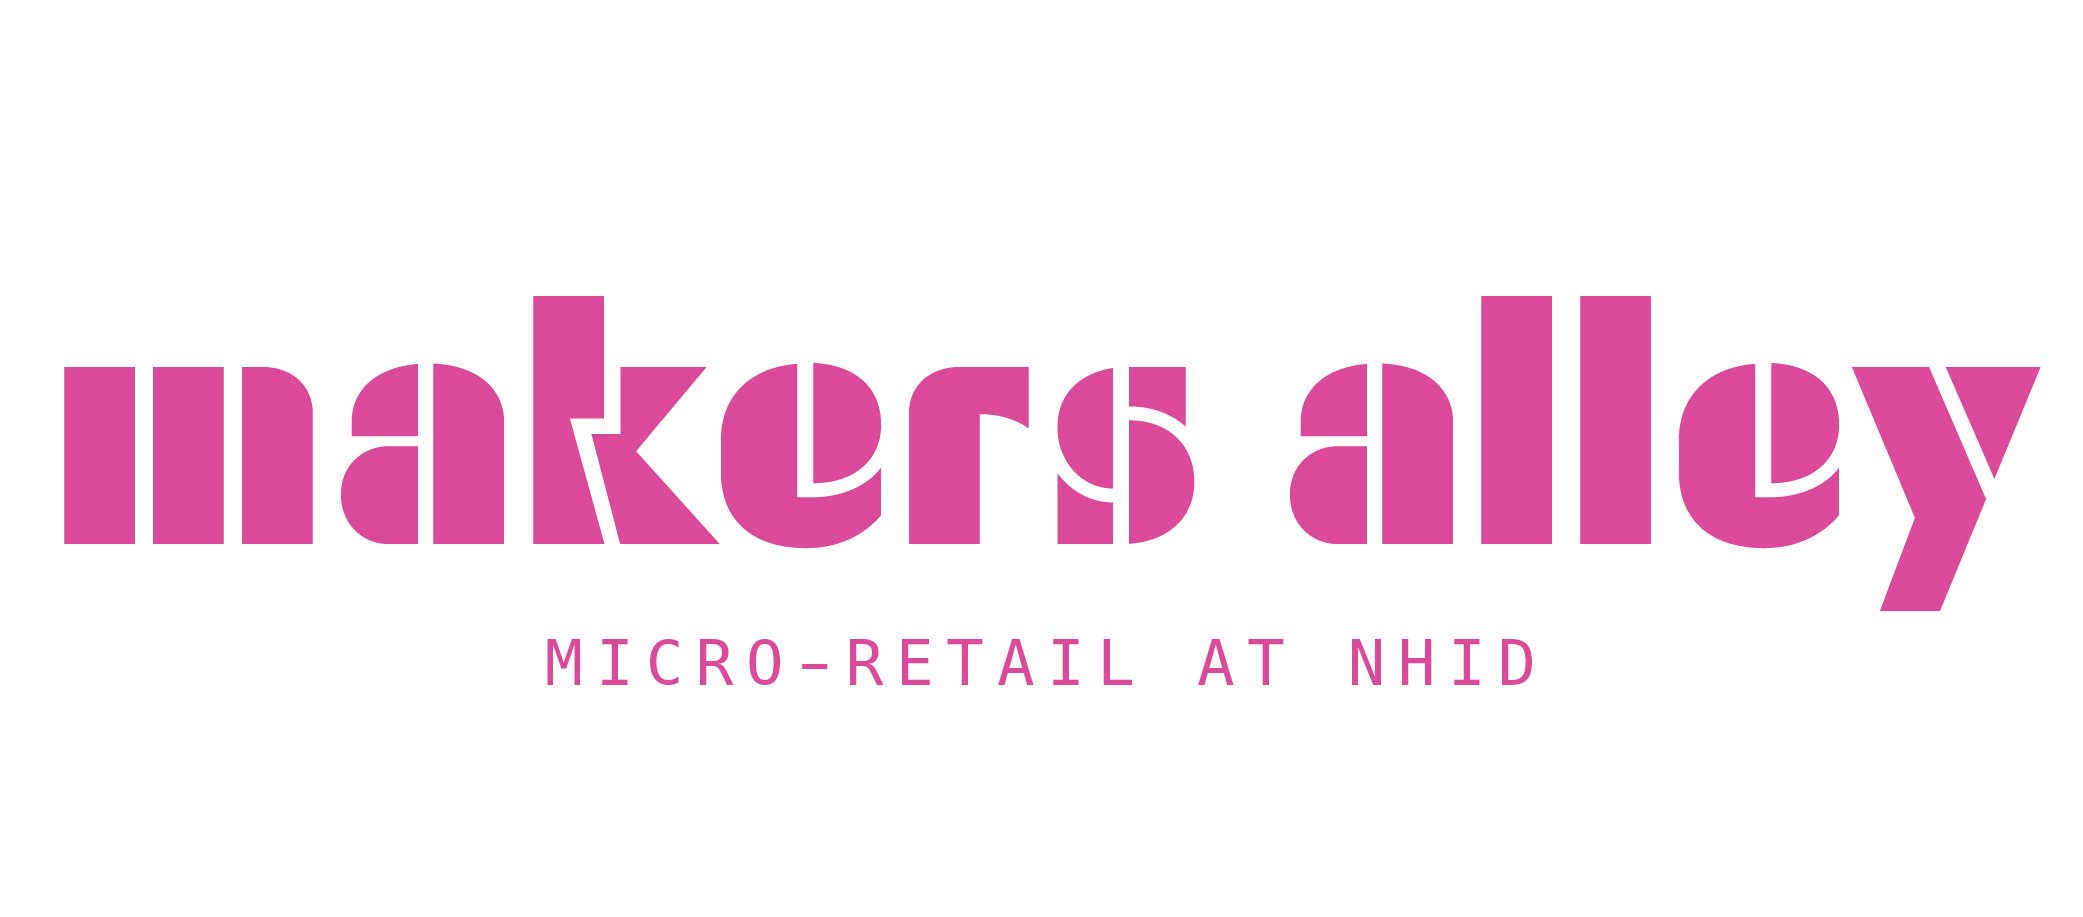 Makers Alley Pink with Tagline.jpg